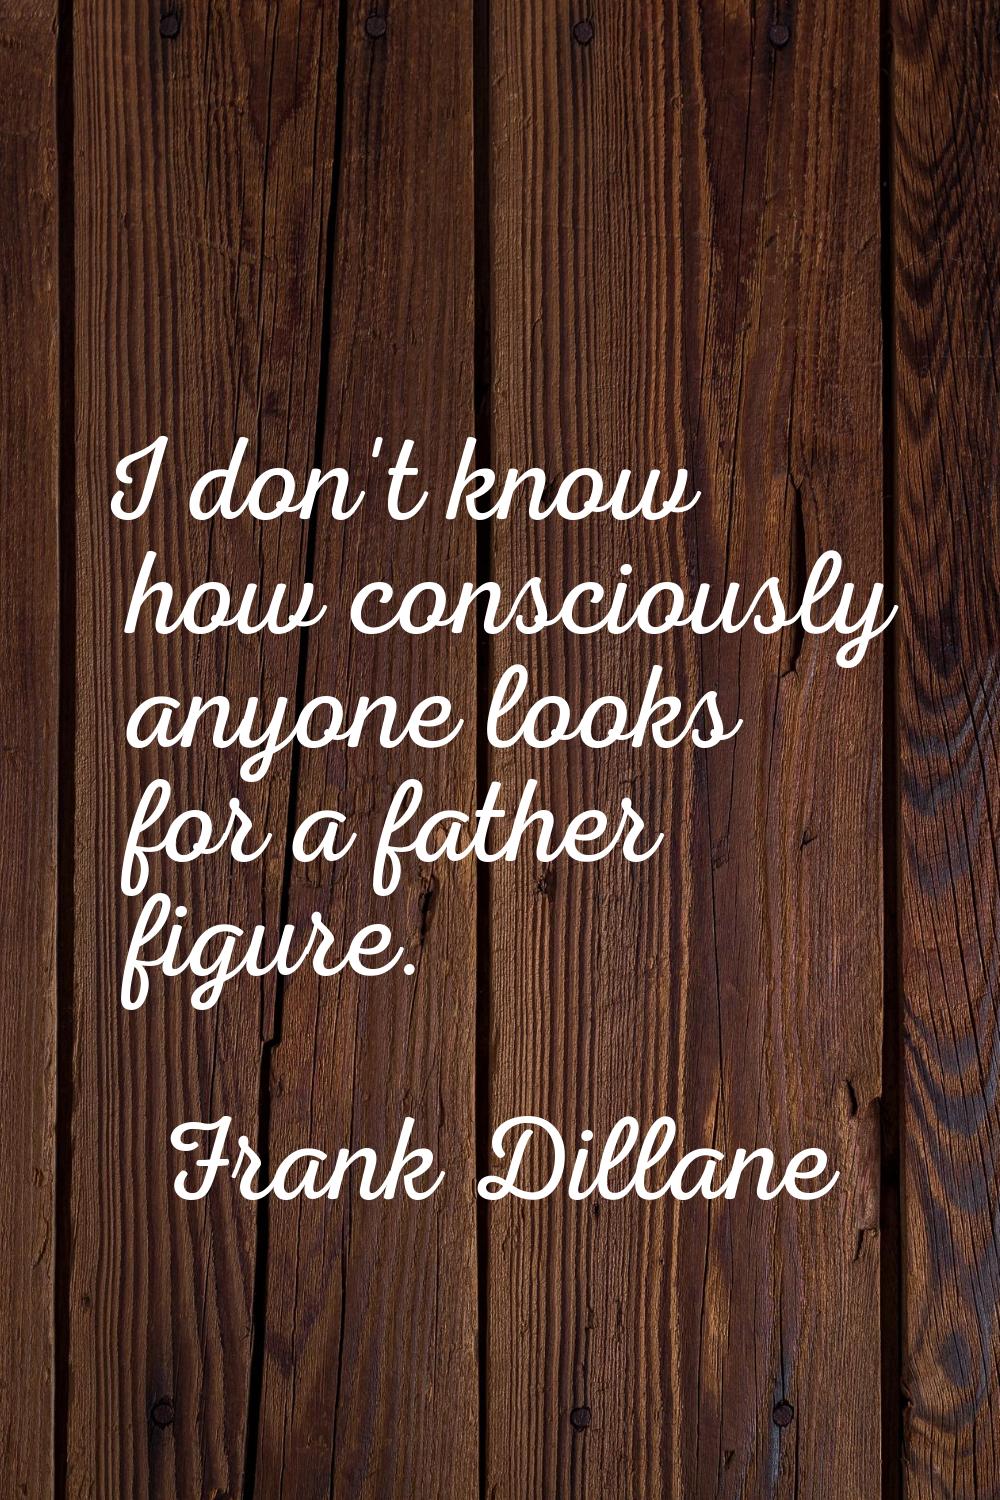 I don't know how consciously anyone looks for a father figure.